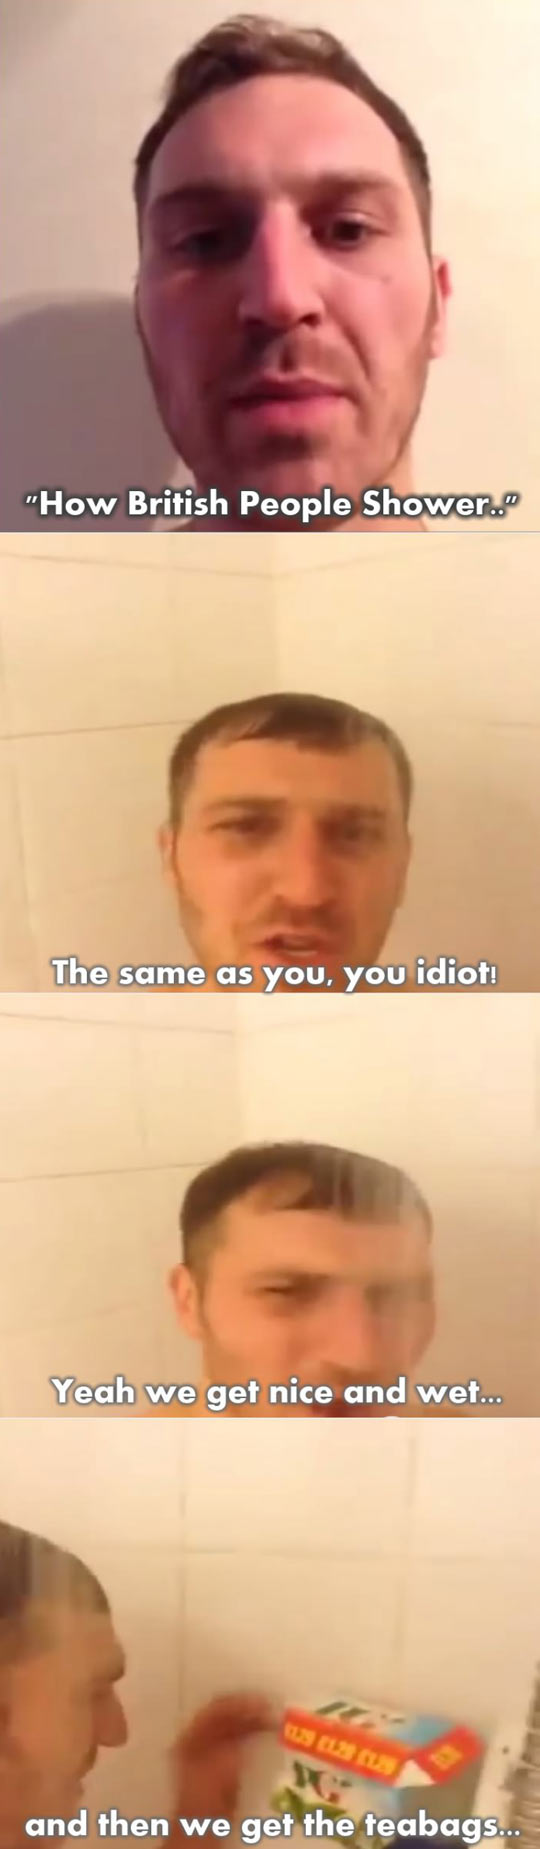 How do British people shower?